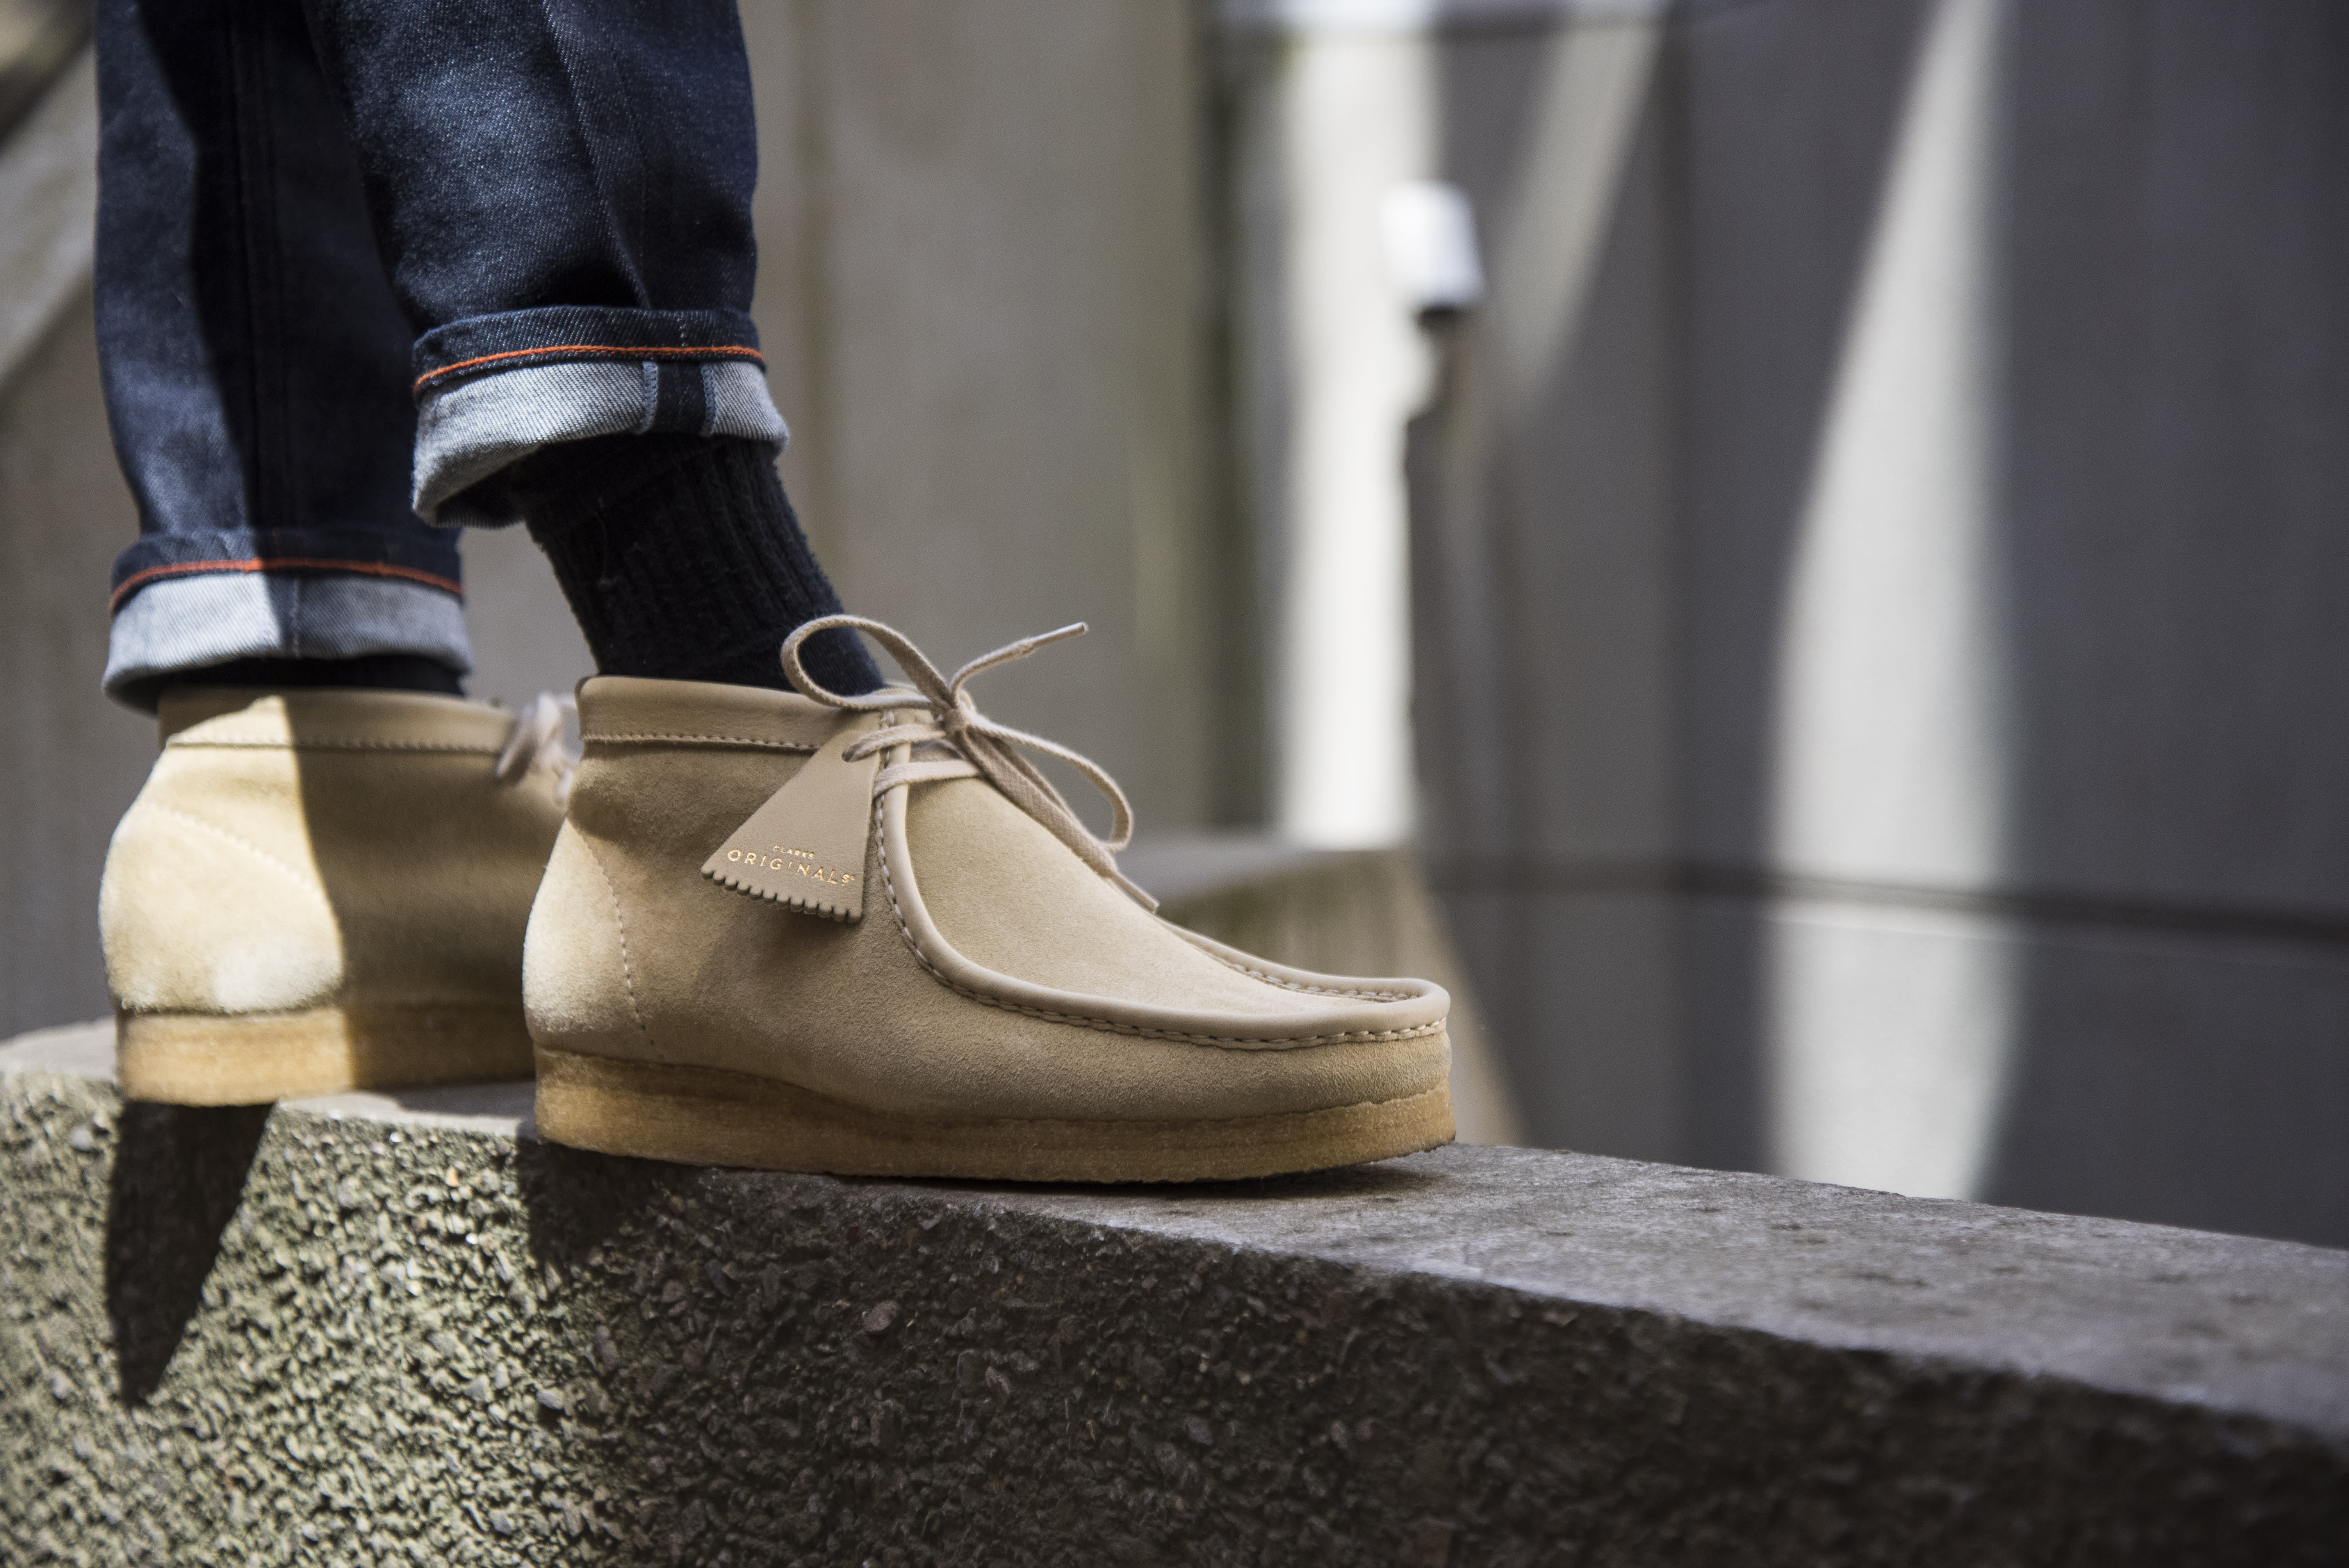 Clarks Originals Wrap the Wallabee in Luxury with the Made in